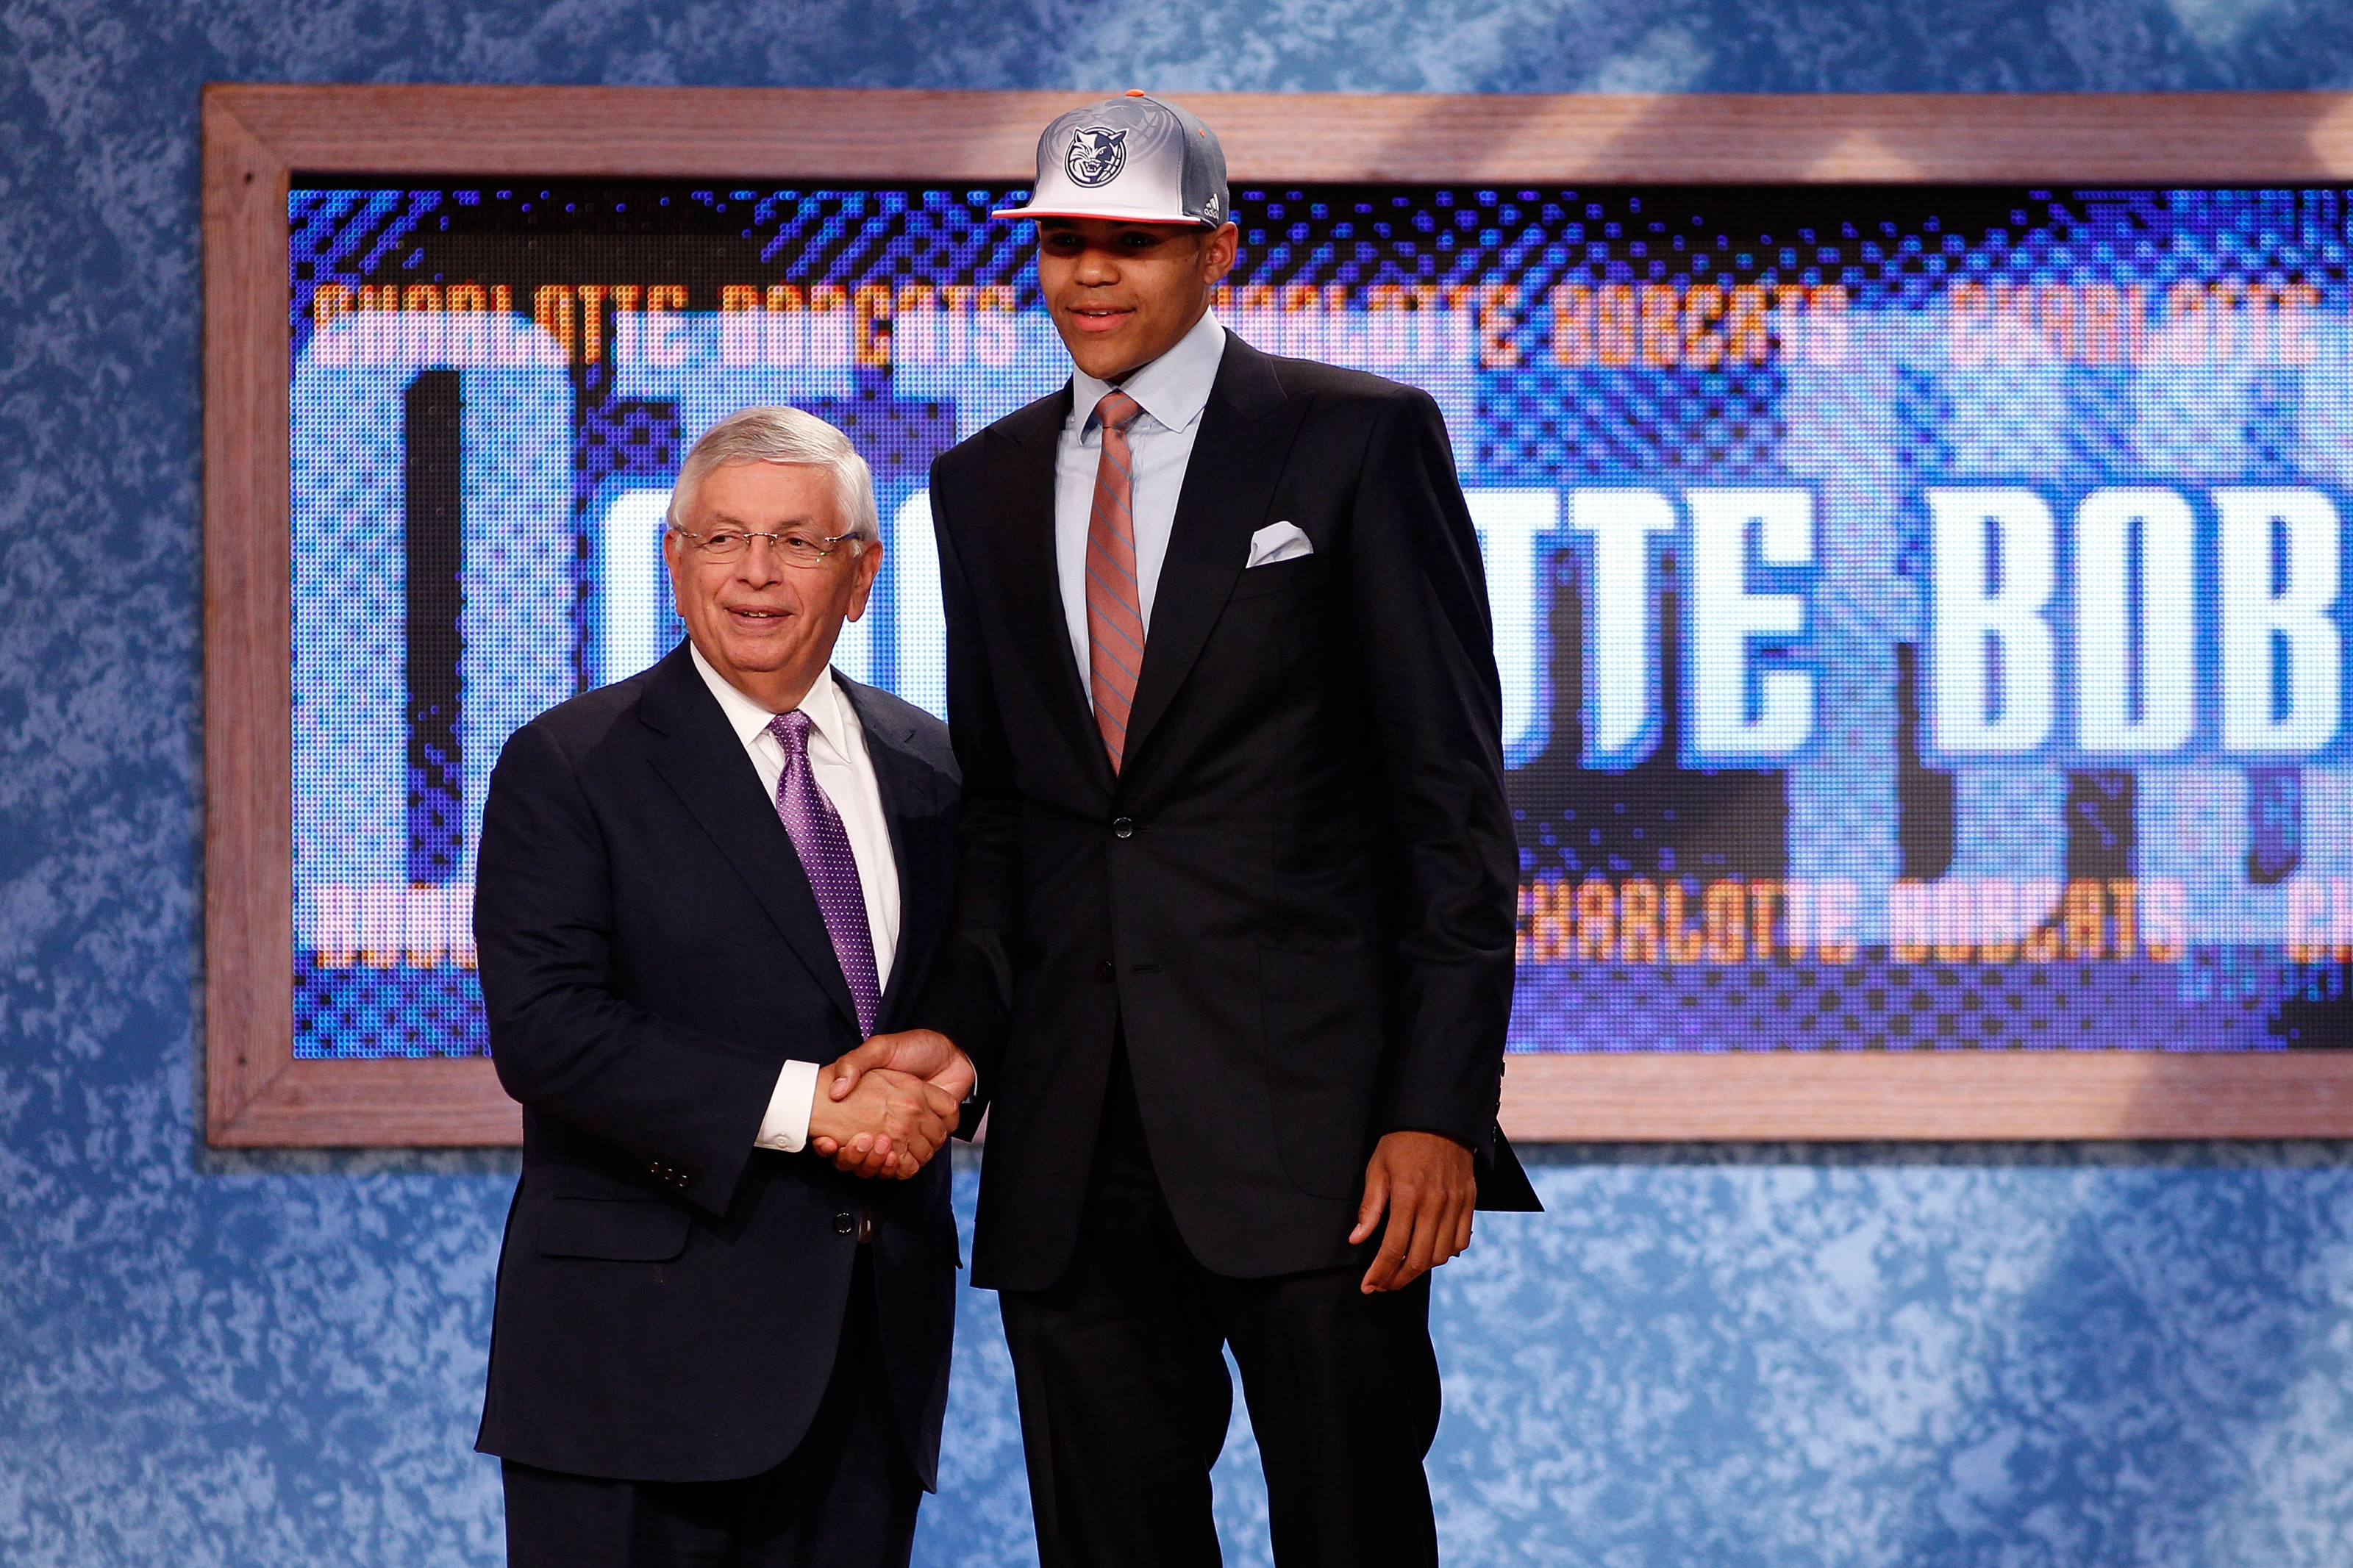 Tobias Harris Drafted by Bobcats, Traded to Bucks